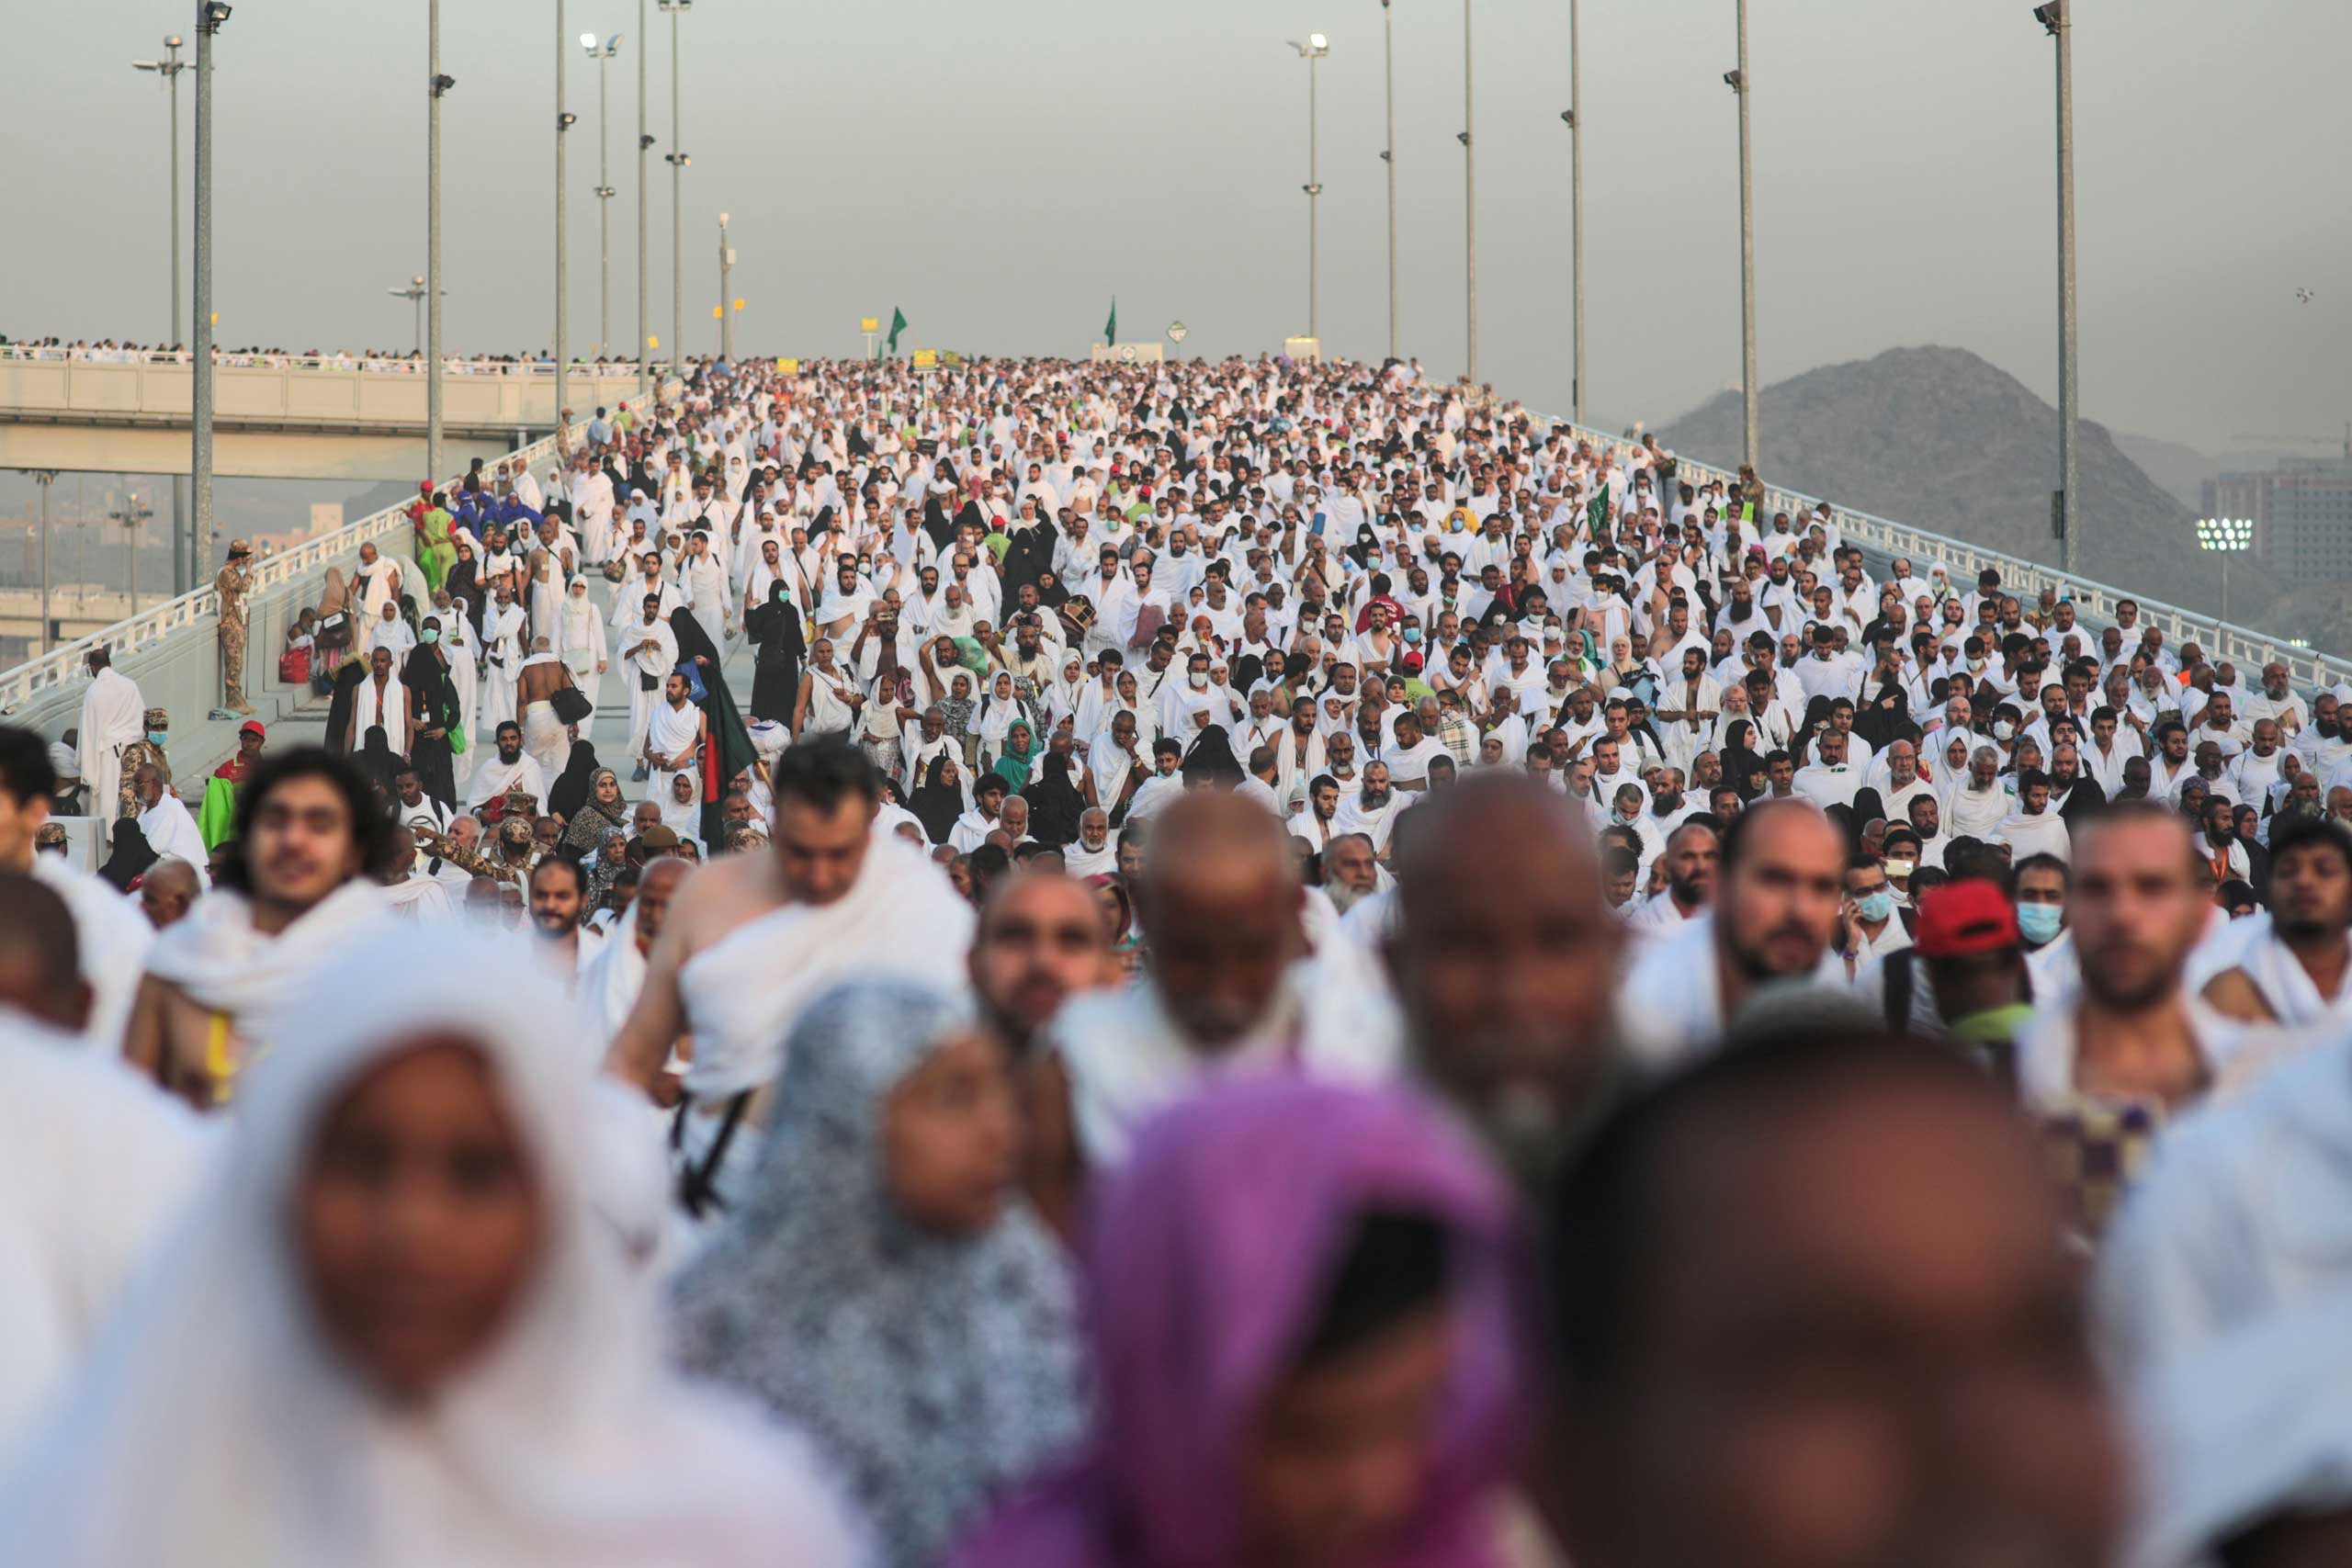 Hundreds of thousands of Muslim pilgrims make their way to cast stones at a pillar symbolizing the stoning of Satan, in a ritual called  Jamarat,  the last rite of the annual hajj, on the first day of Eid al-Adha, in Mina near the holy city of Mecca, on Sept. 24, 2015.